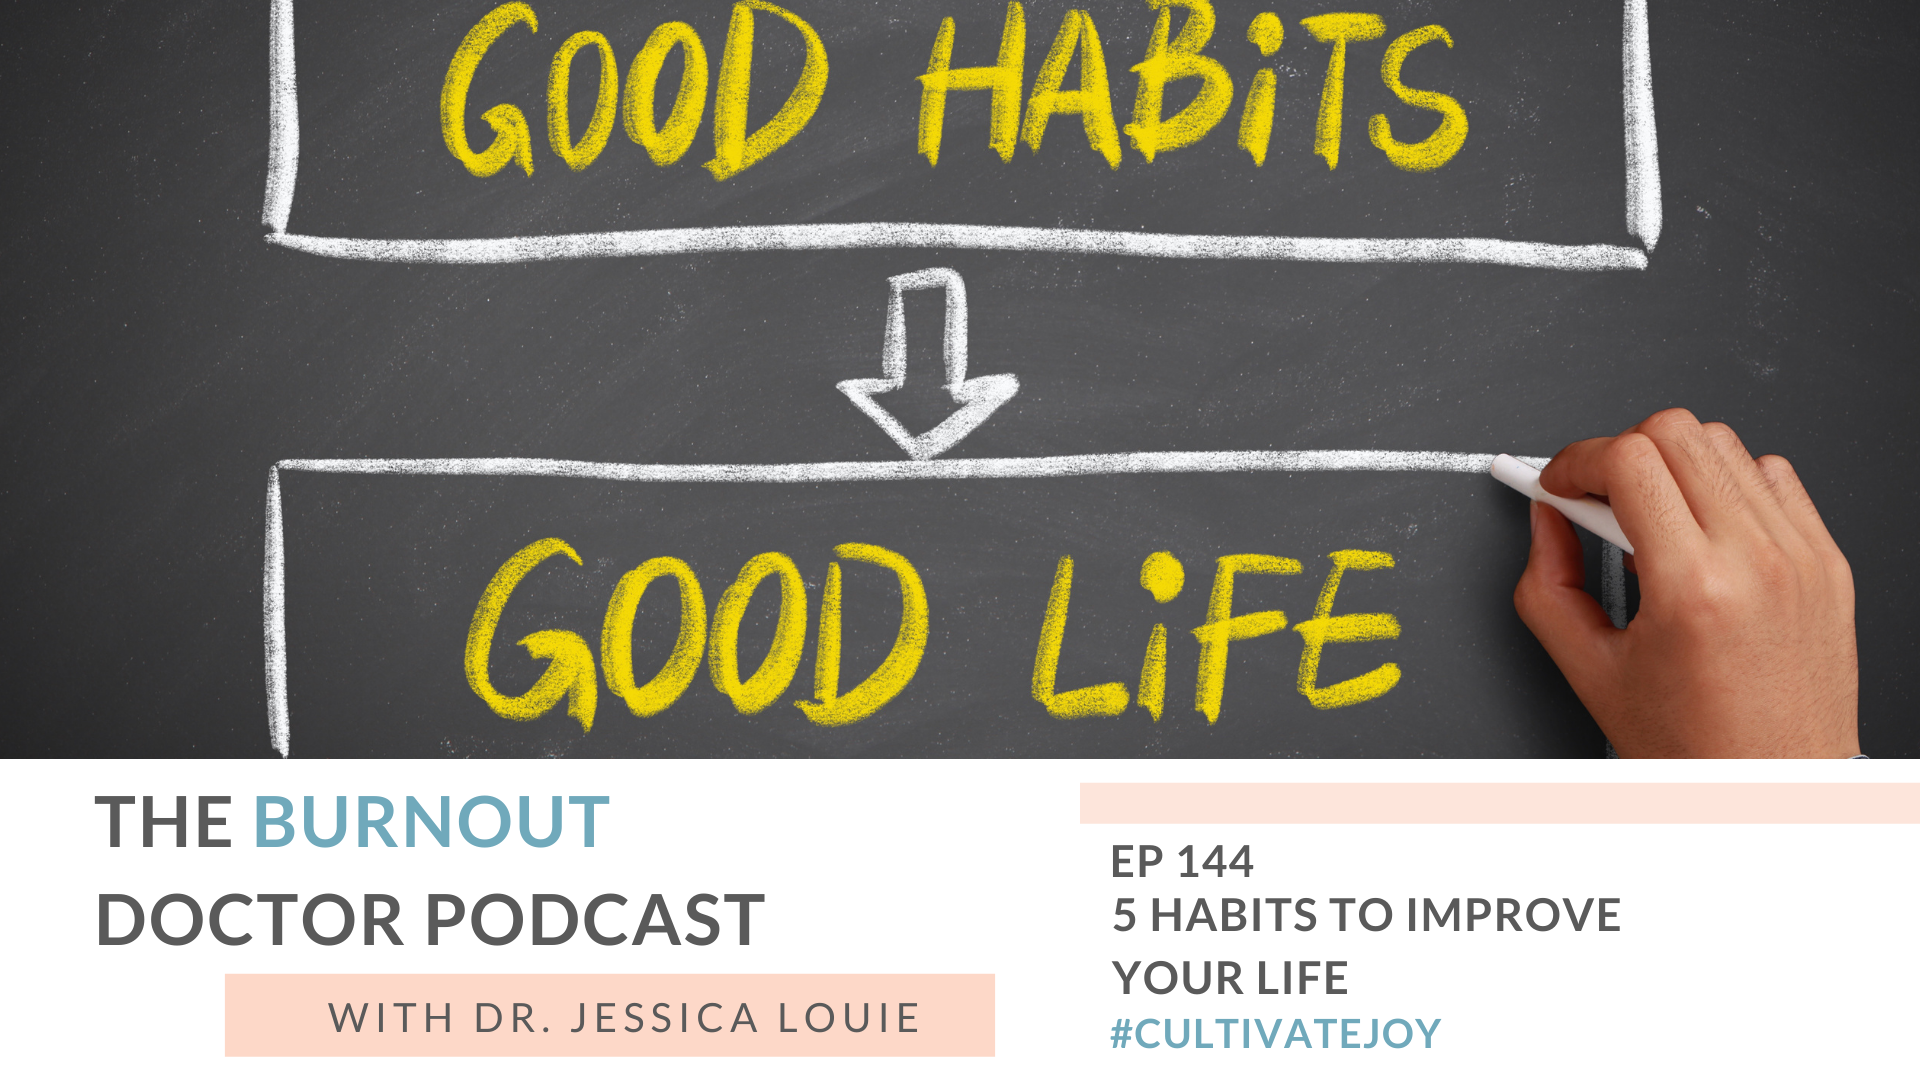 5 Habits to improve your life in 2022. New habits new year. How to goal set. Pharmacist burnout speaker. Dr. Jessica Louie. The Burnout Doctor Podcast.